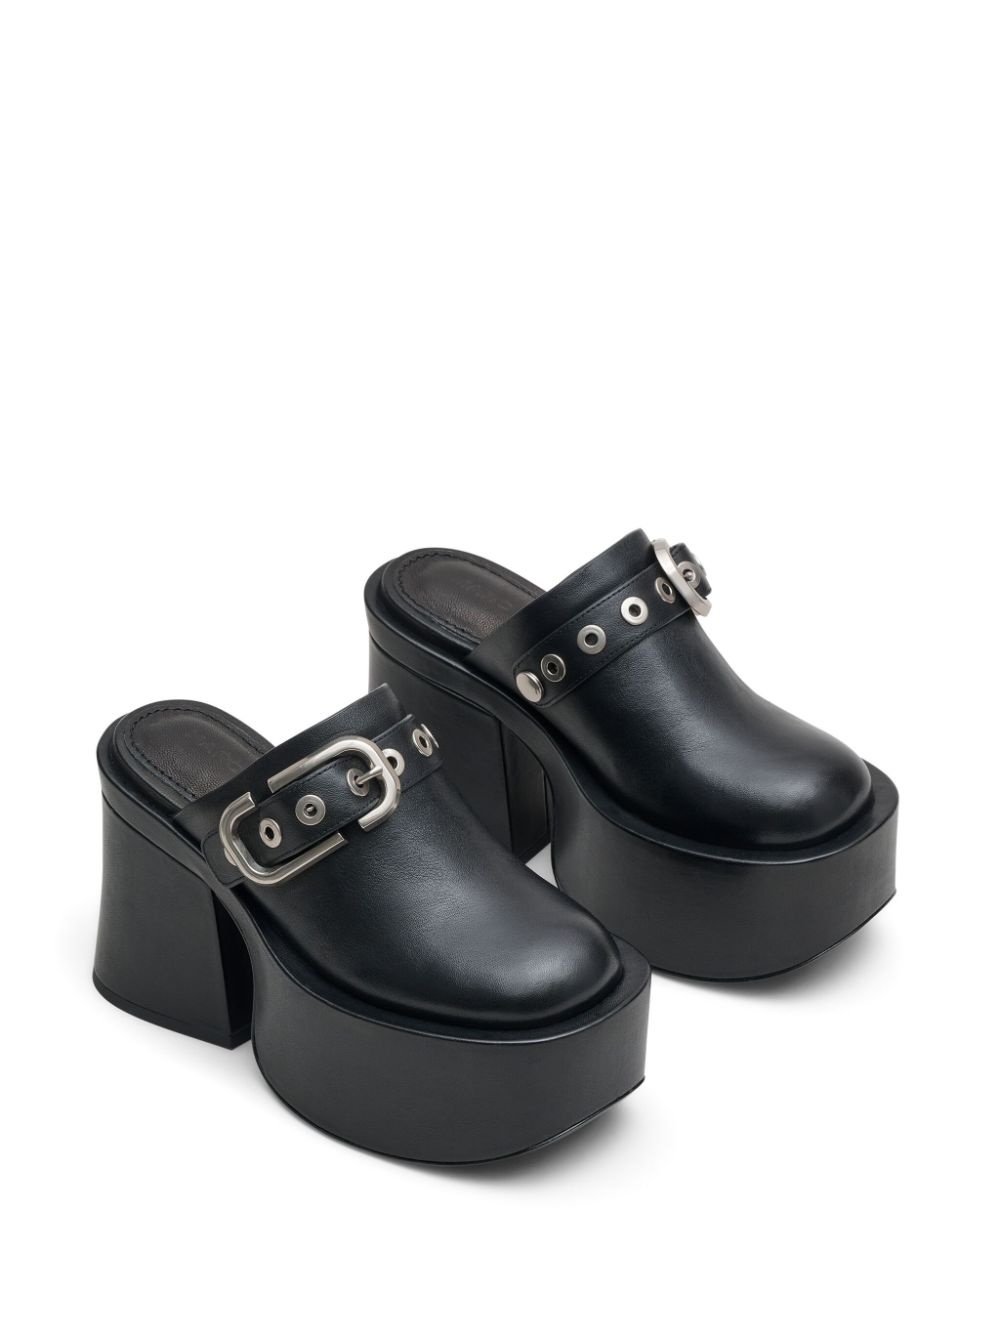 The J Marc leather clogs - 2